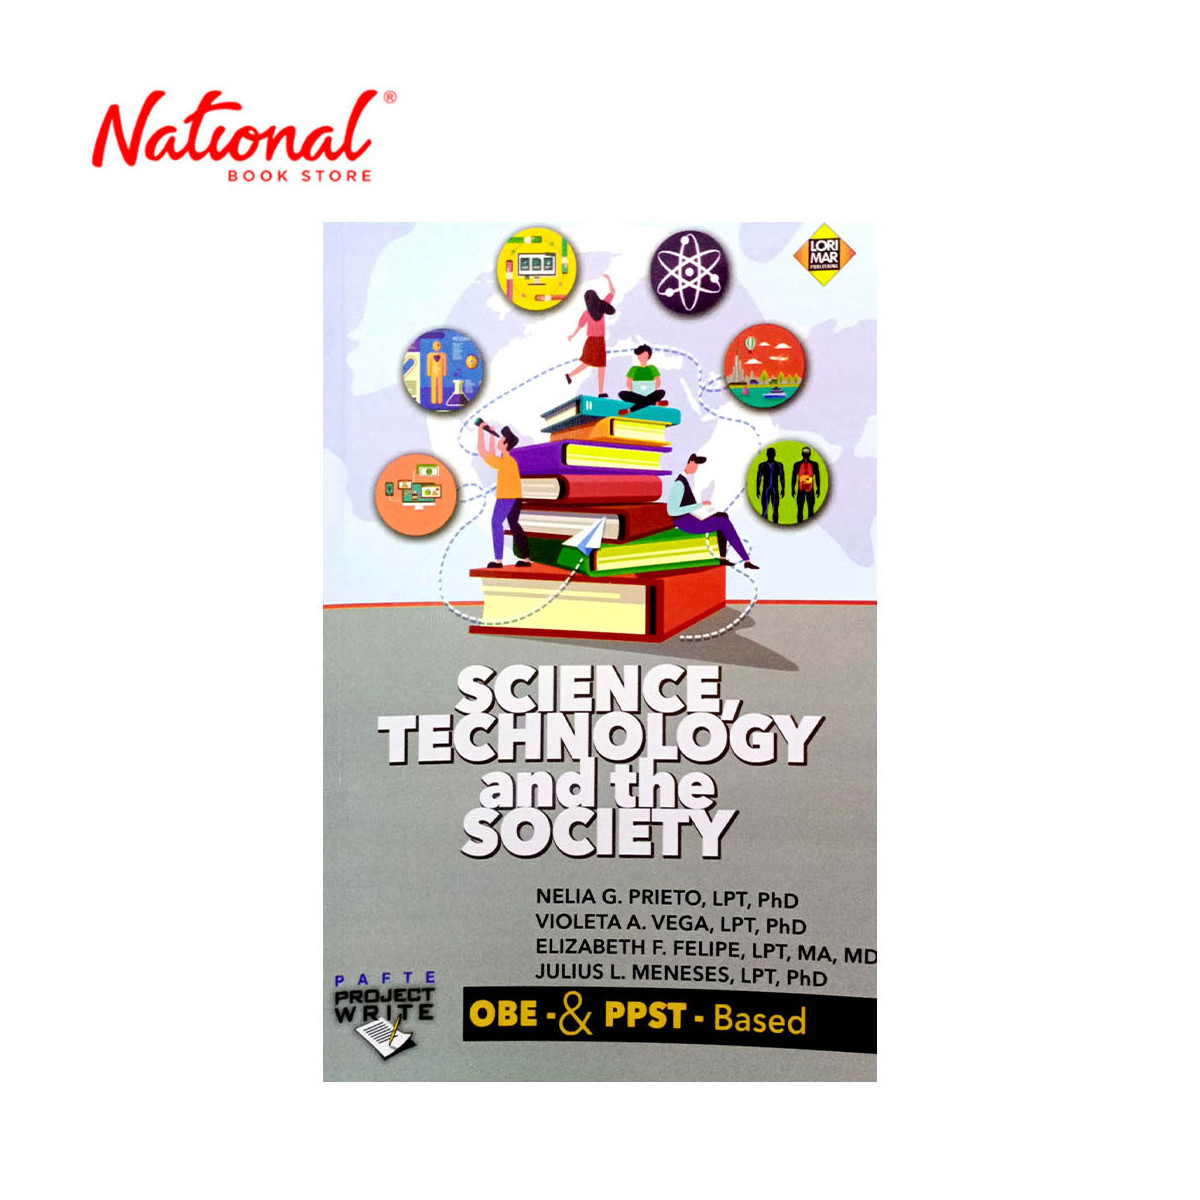 Science, Technology and the Society by Nelia G. Prieto, et al. - Trade Paperback - College Science